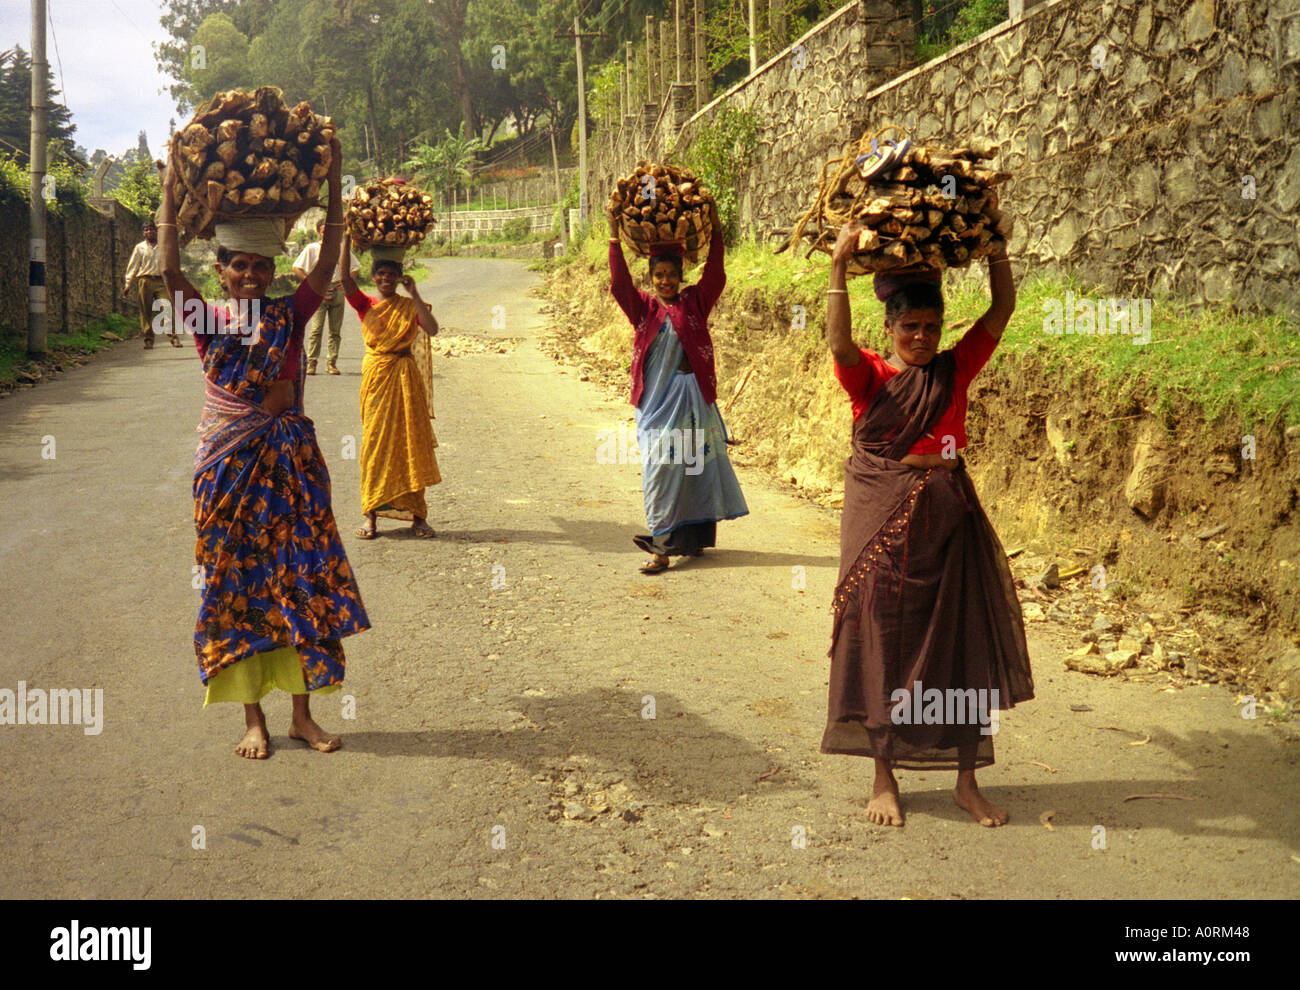 Group of women in traditional clothing carry heavy wood on head  Udhagamandalam Ootacamund Ooty Tamil Nadu India South Asia Stock Photo -  Alamy